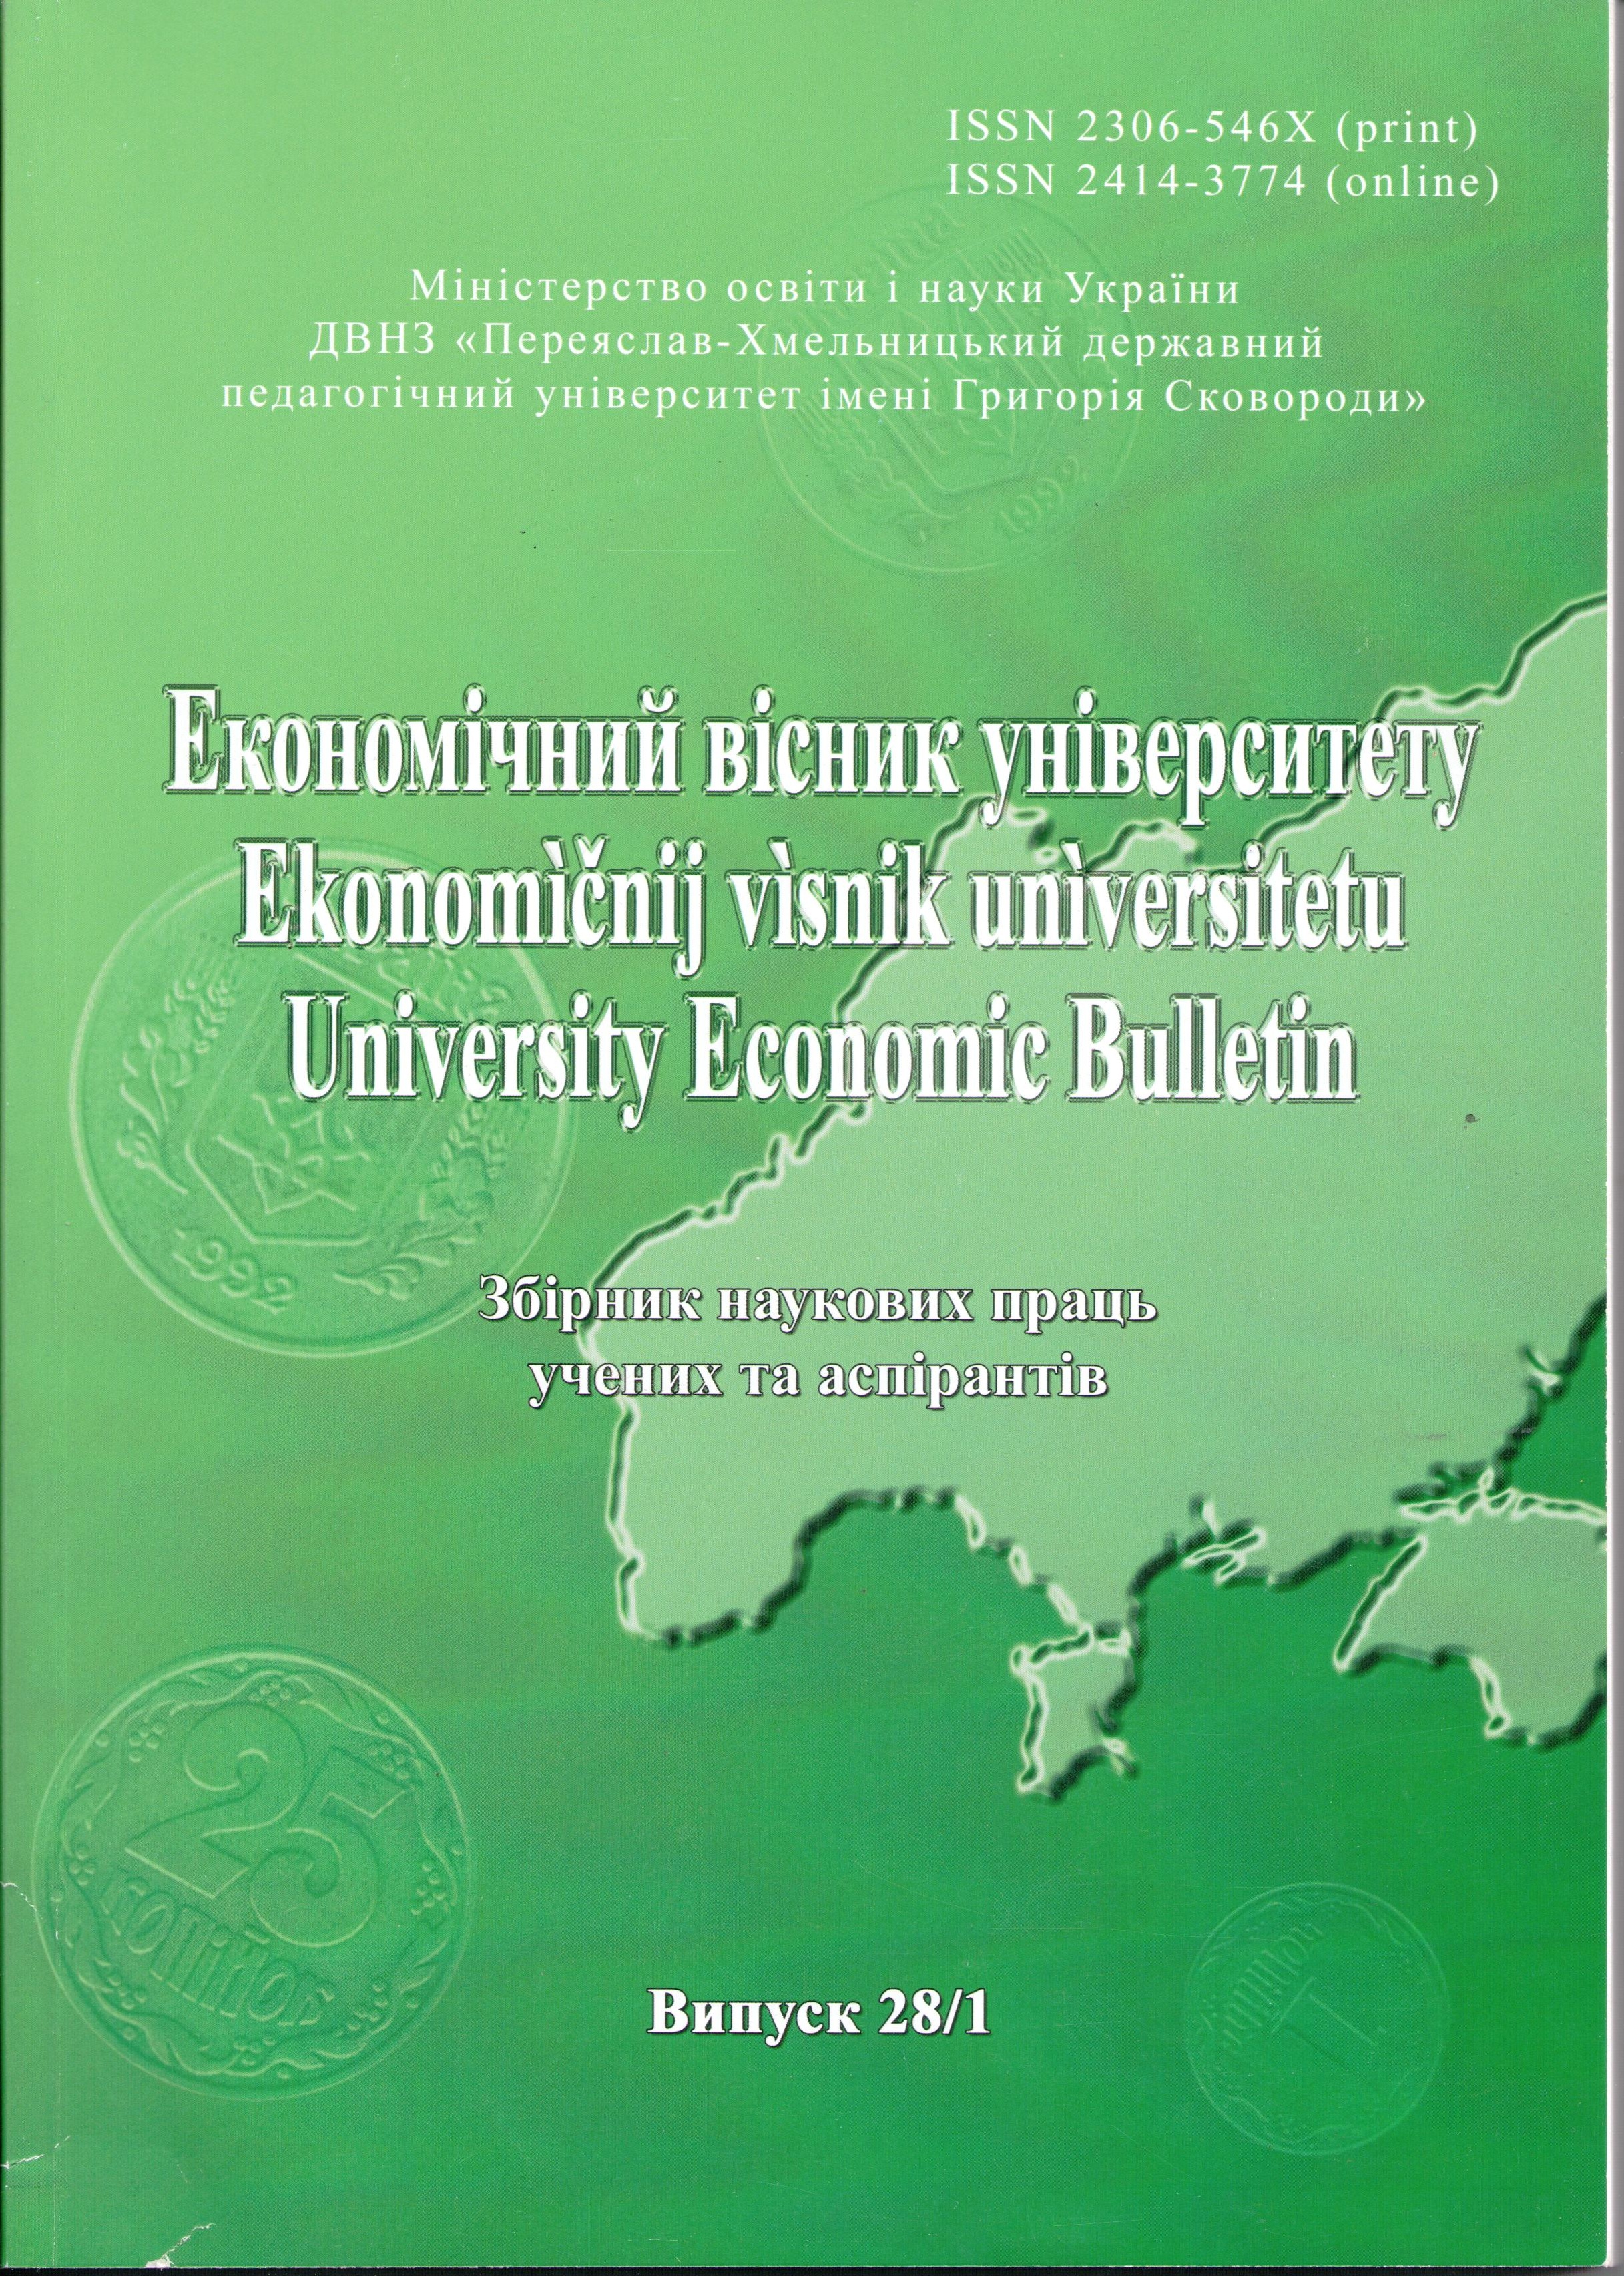 Budget expenditure formation in the social and economic development Cover Image